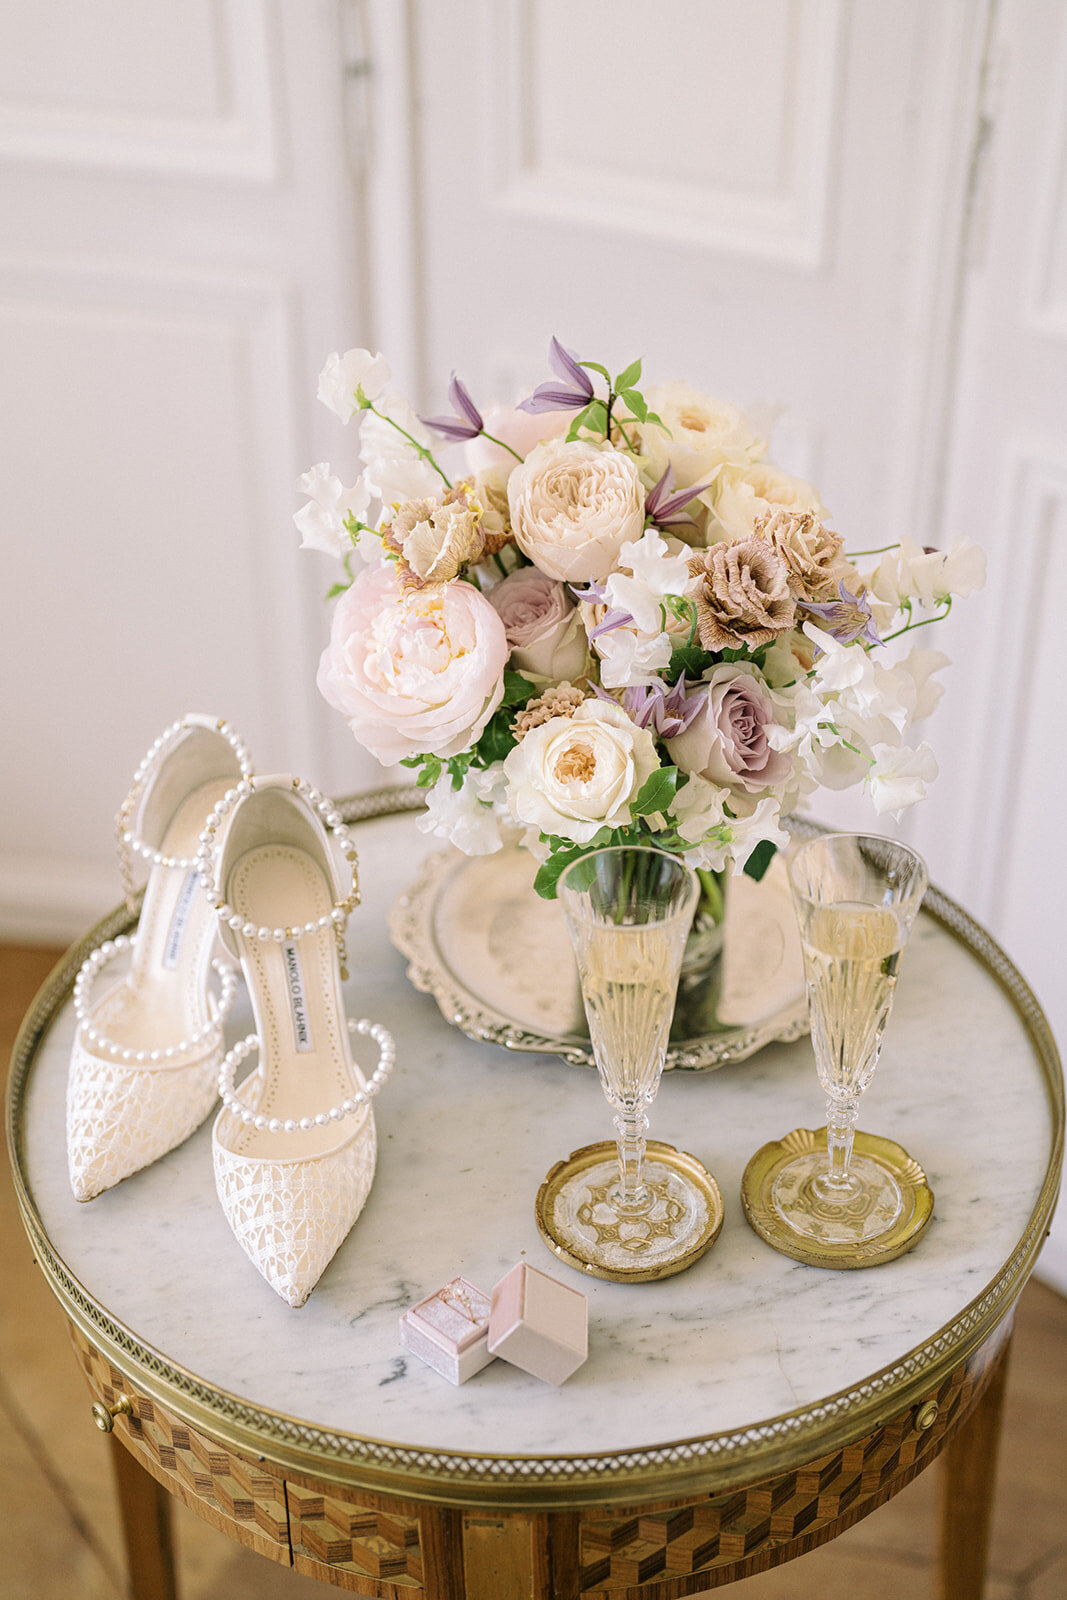 Jennifer Fox Weddings English speaking wedding planning & design agency in France crafting refined and bespoke weddings and celebrations Provence, Paris and destination A&T's Wedding - Harriette Earnshaw Photography-020